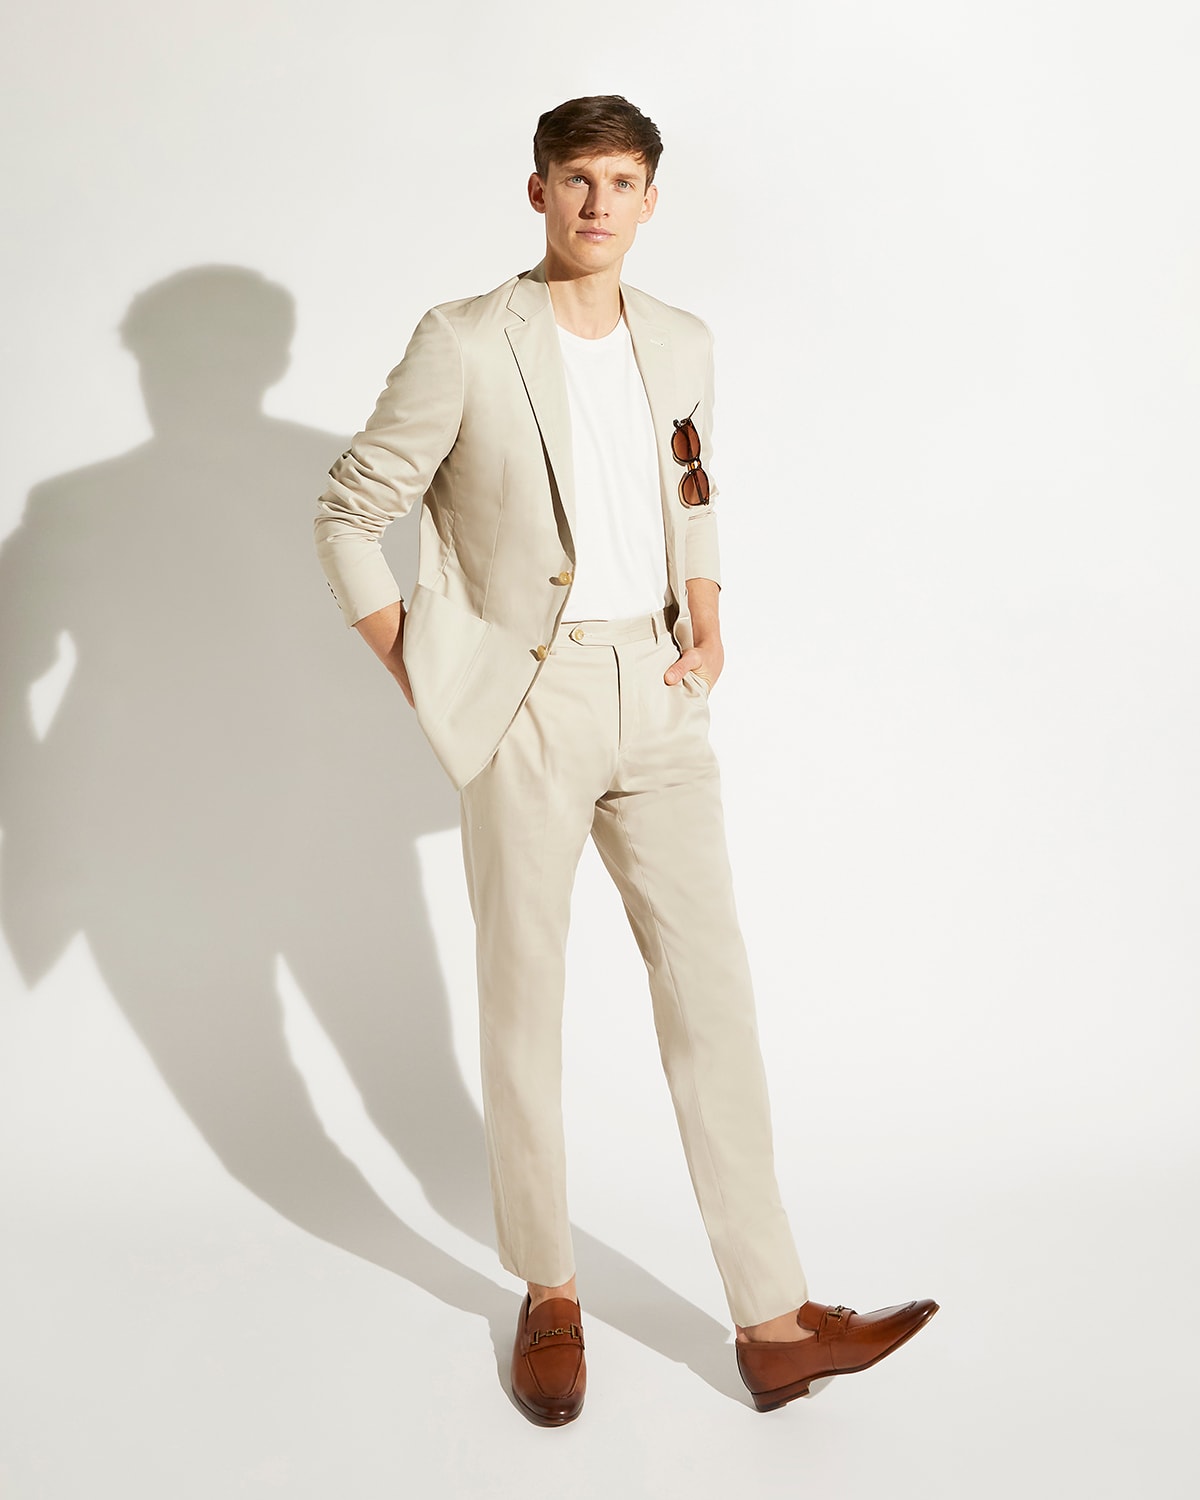 Model wearing the Dune London tan men's sanction loafer for The Style Series